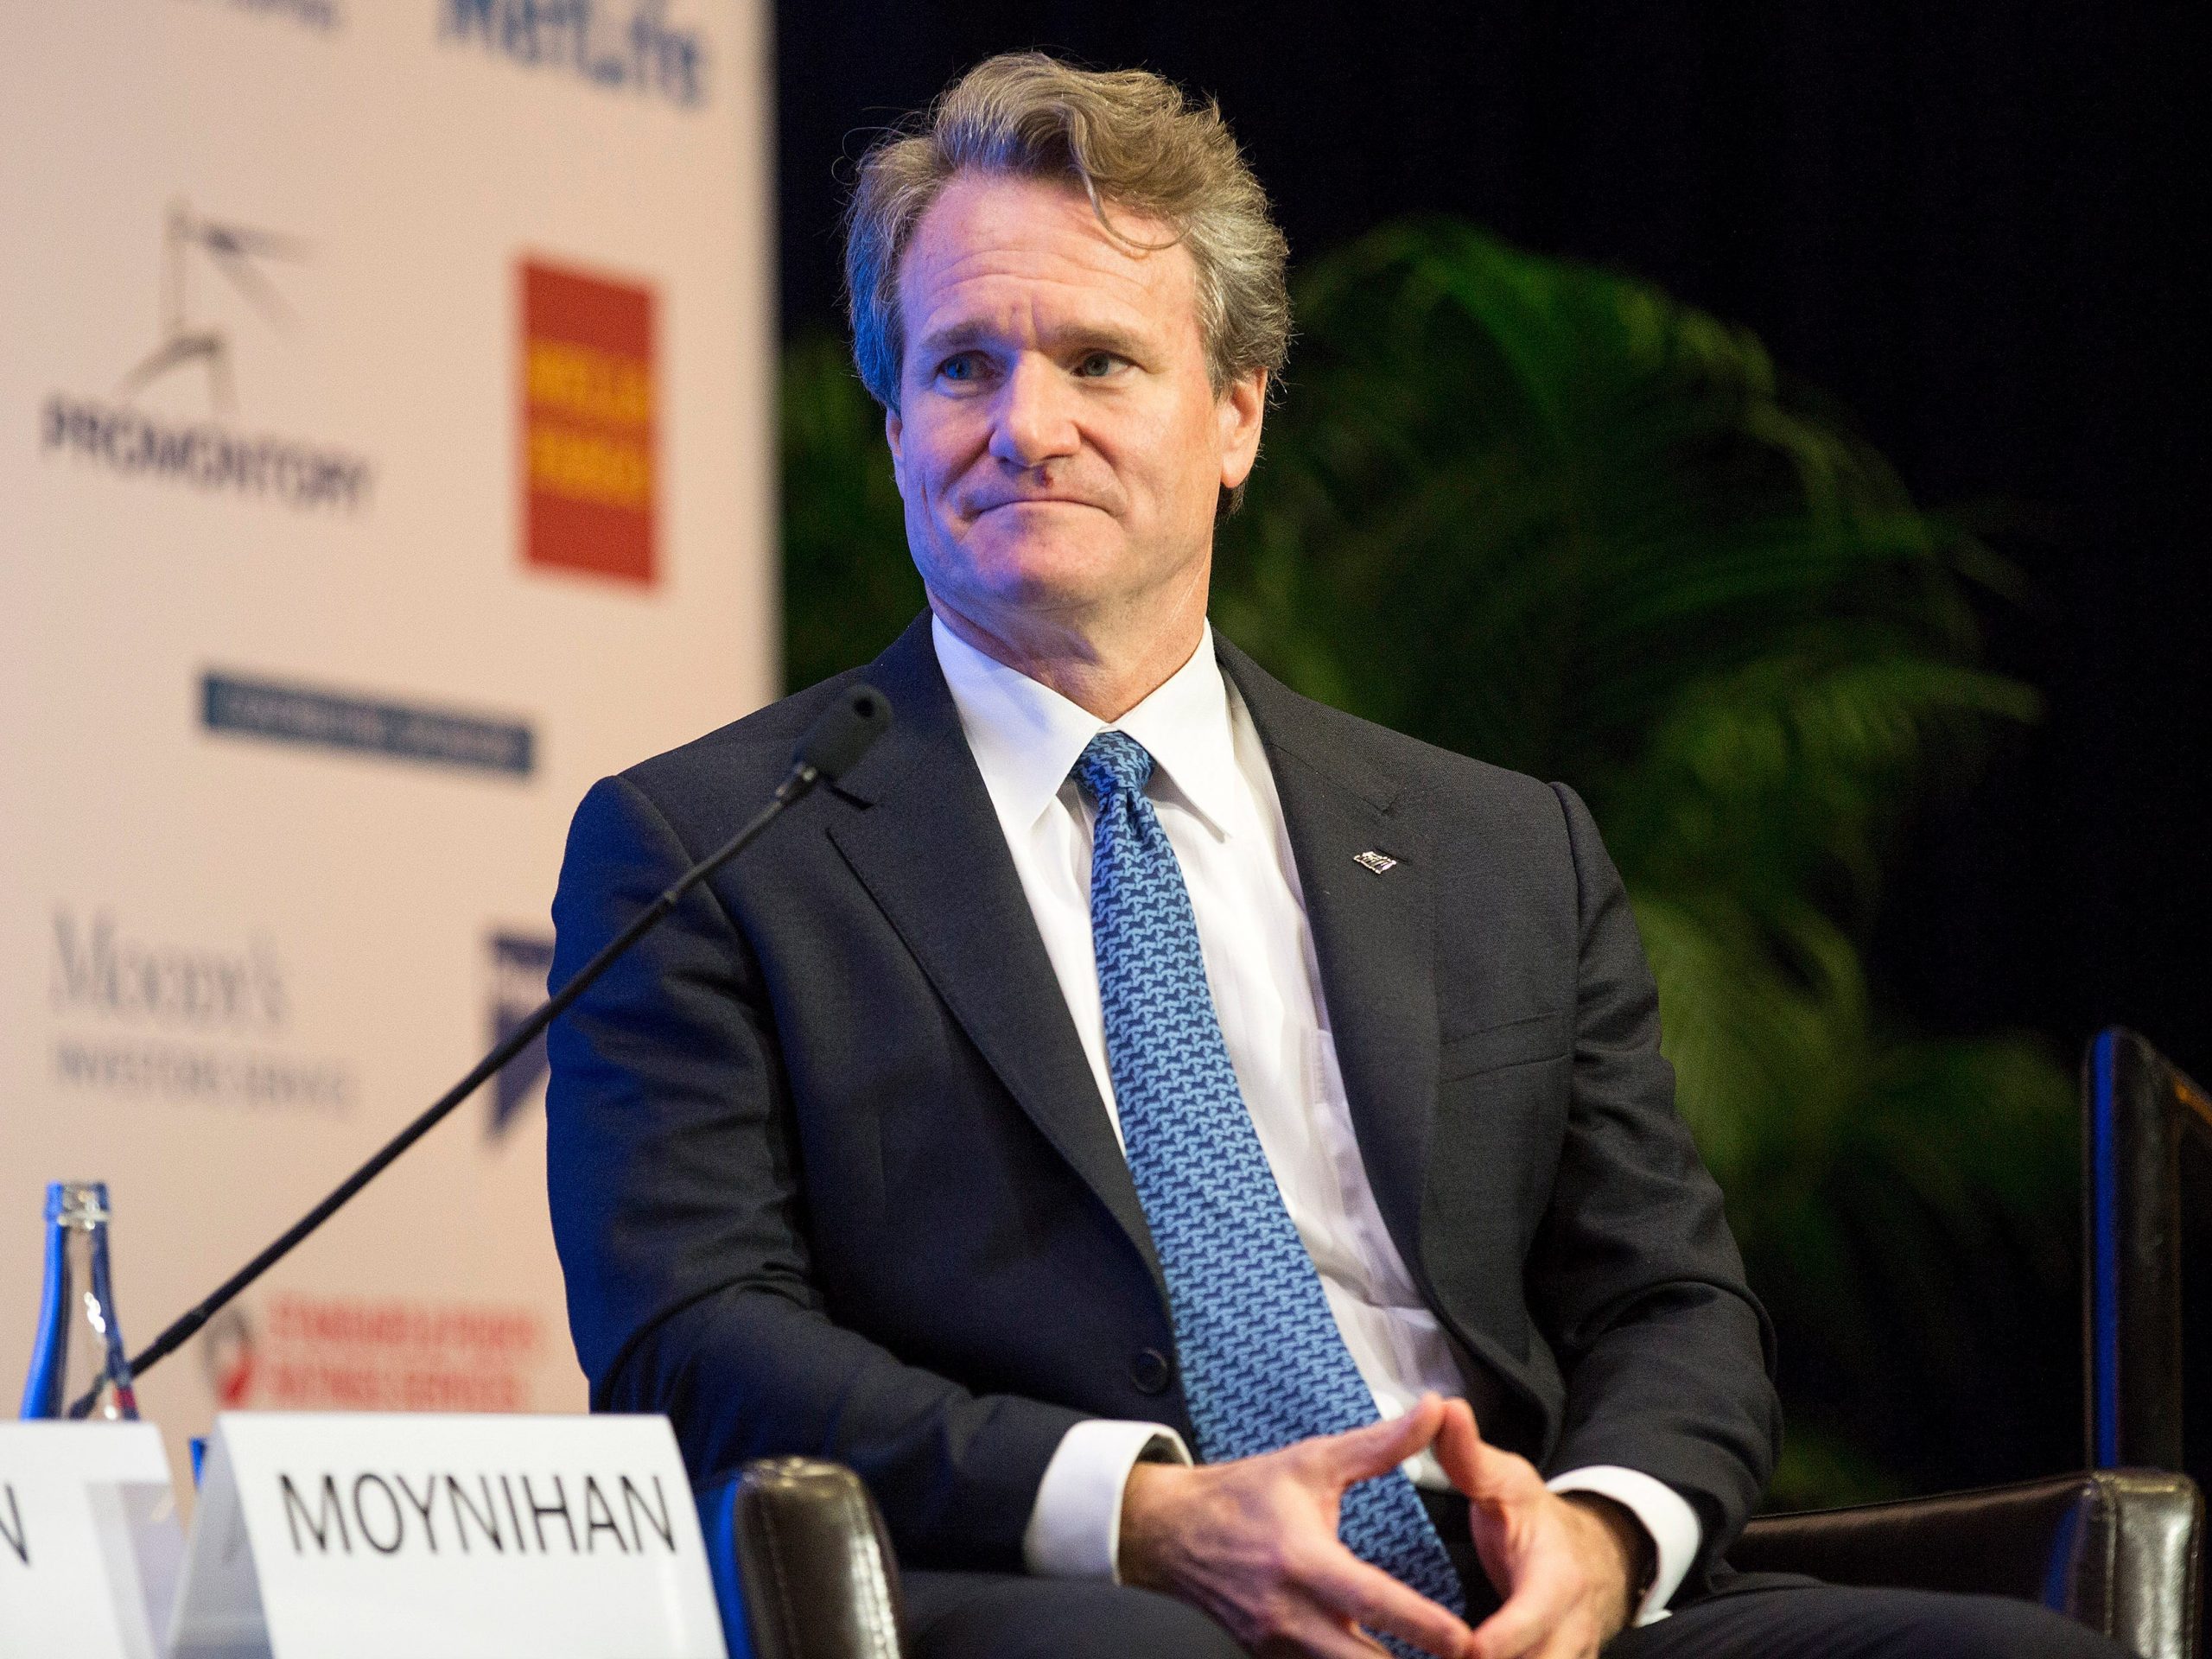 Brian Moynihan, the chief executive of Bank of America.